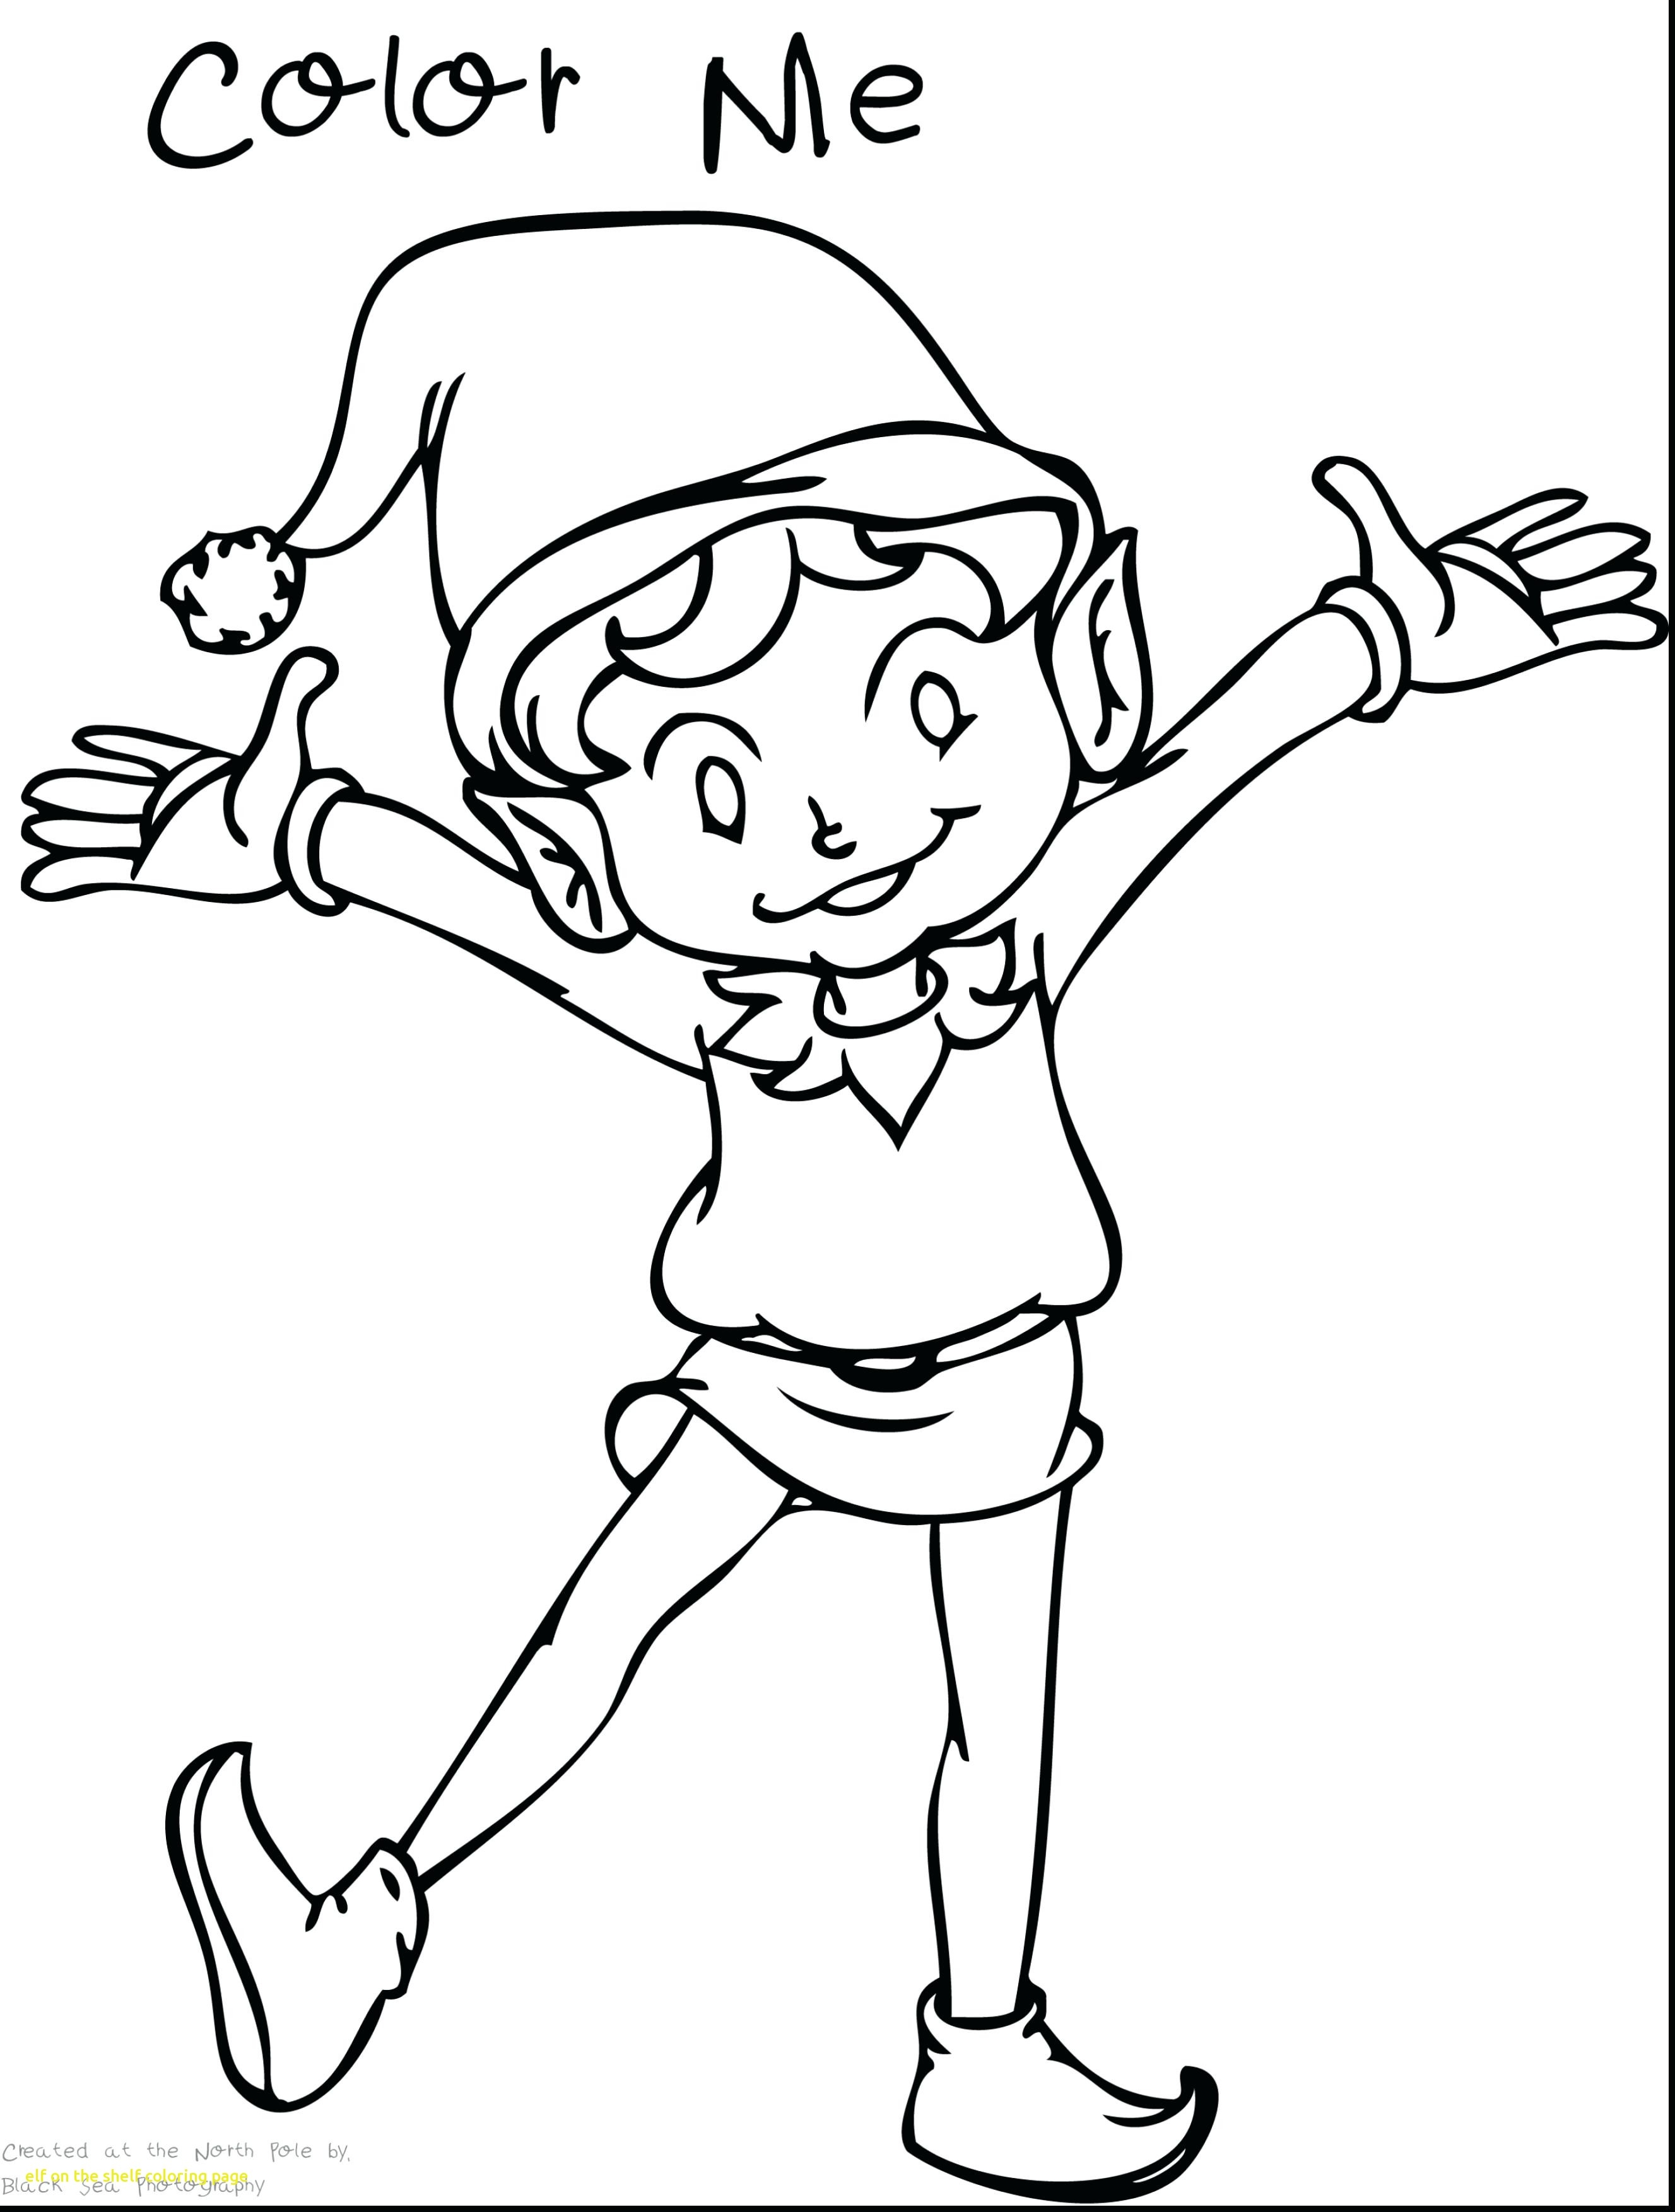 Female Elf Coloring Pages at GetColorings.com | Free printable ...